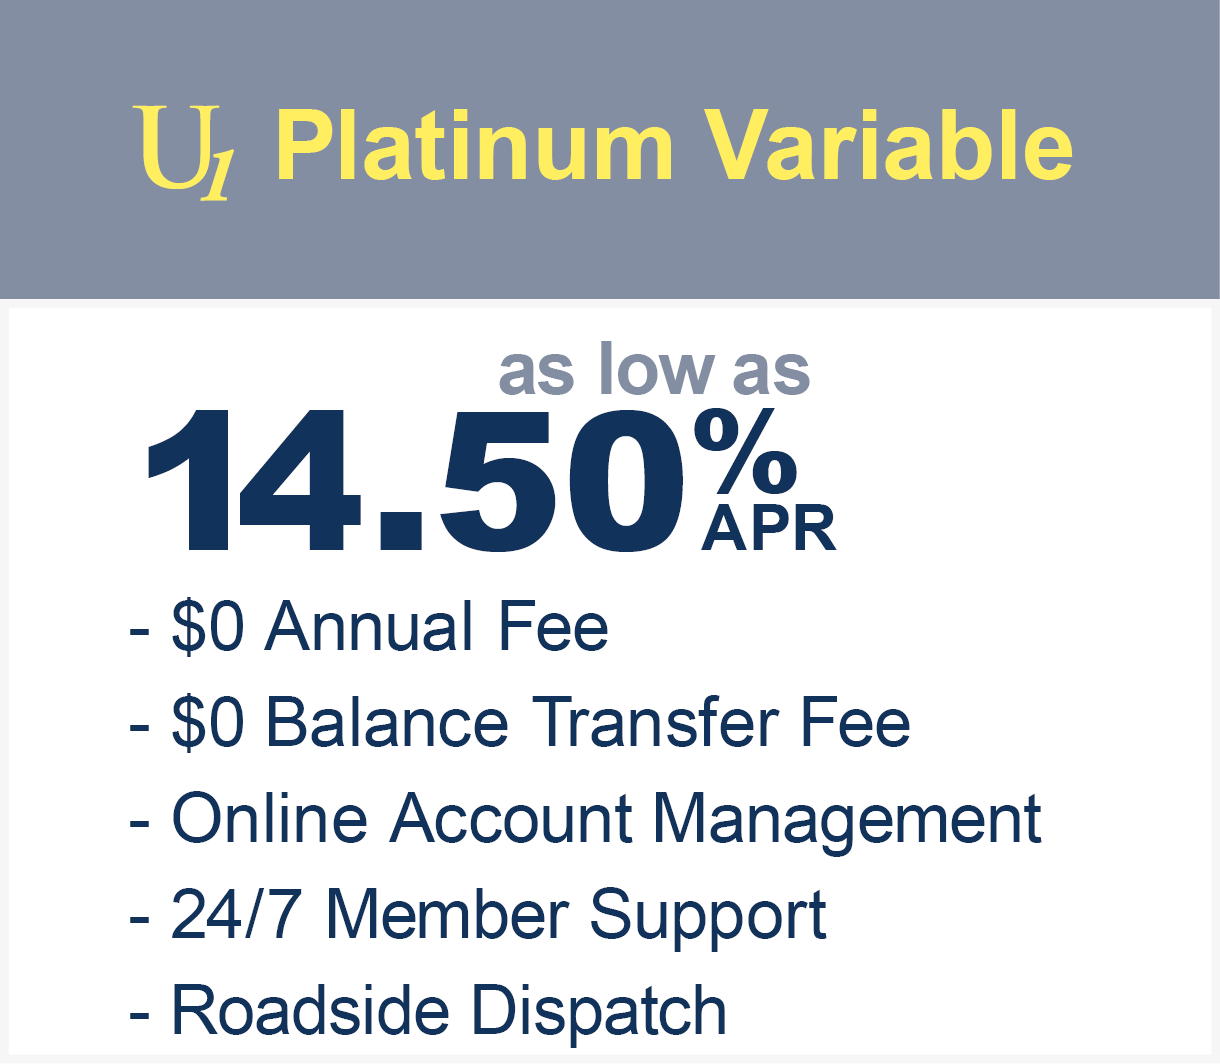 U1 Platinum variable as low as 14.50% APR with $0 balance transfer fee and no annual fee. Online account management and 24/7 member support.